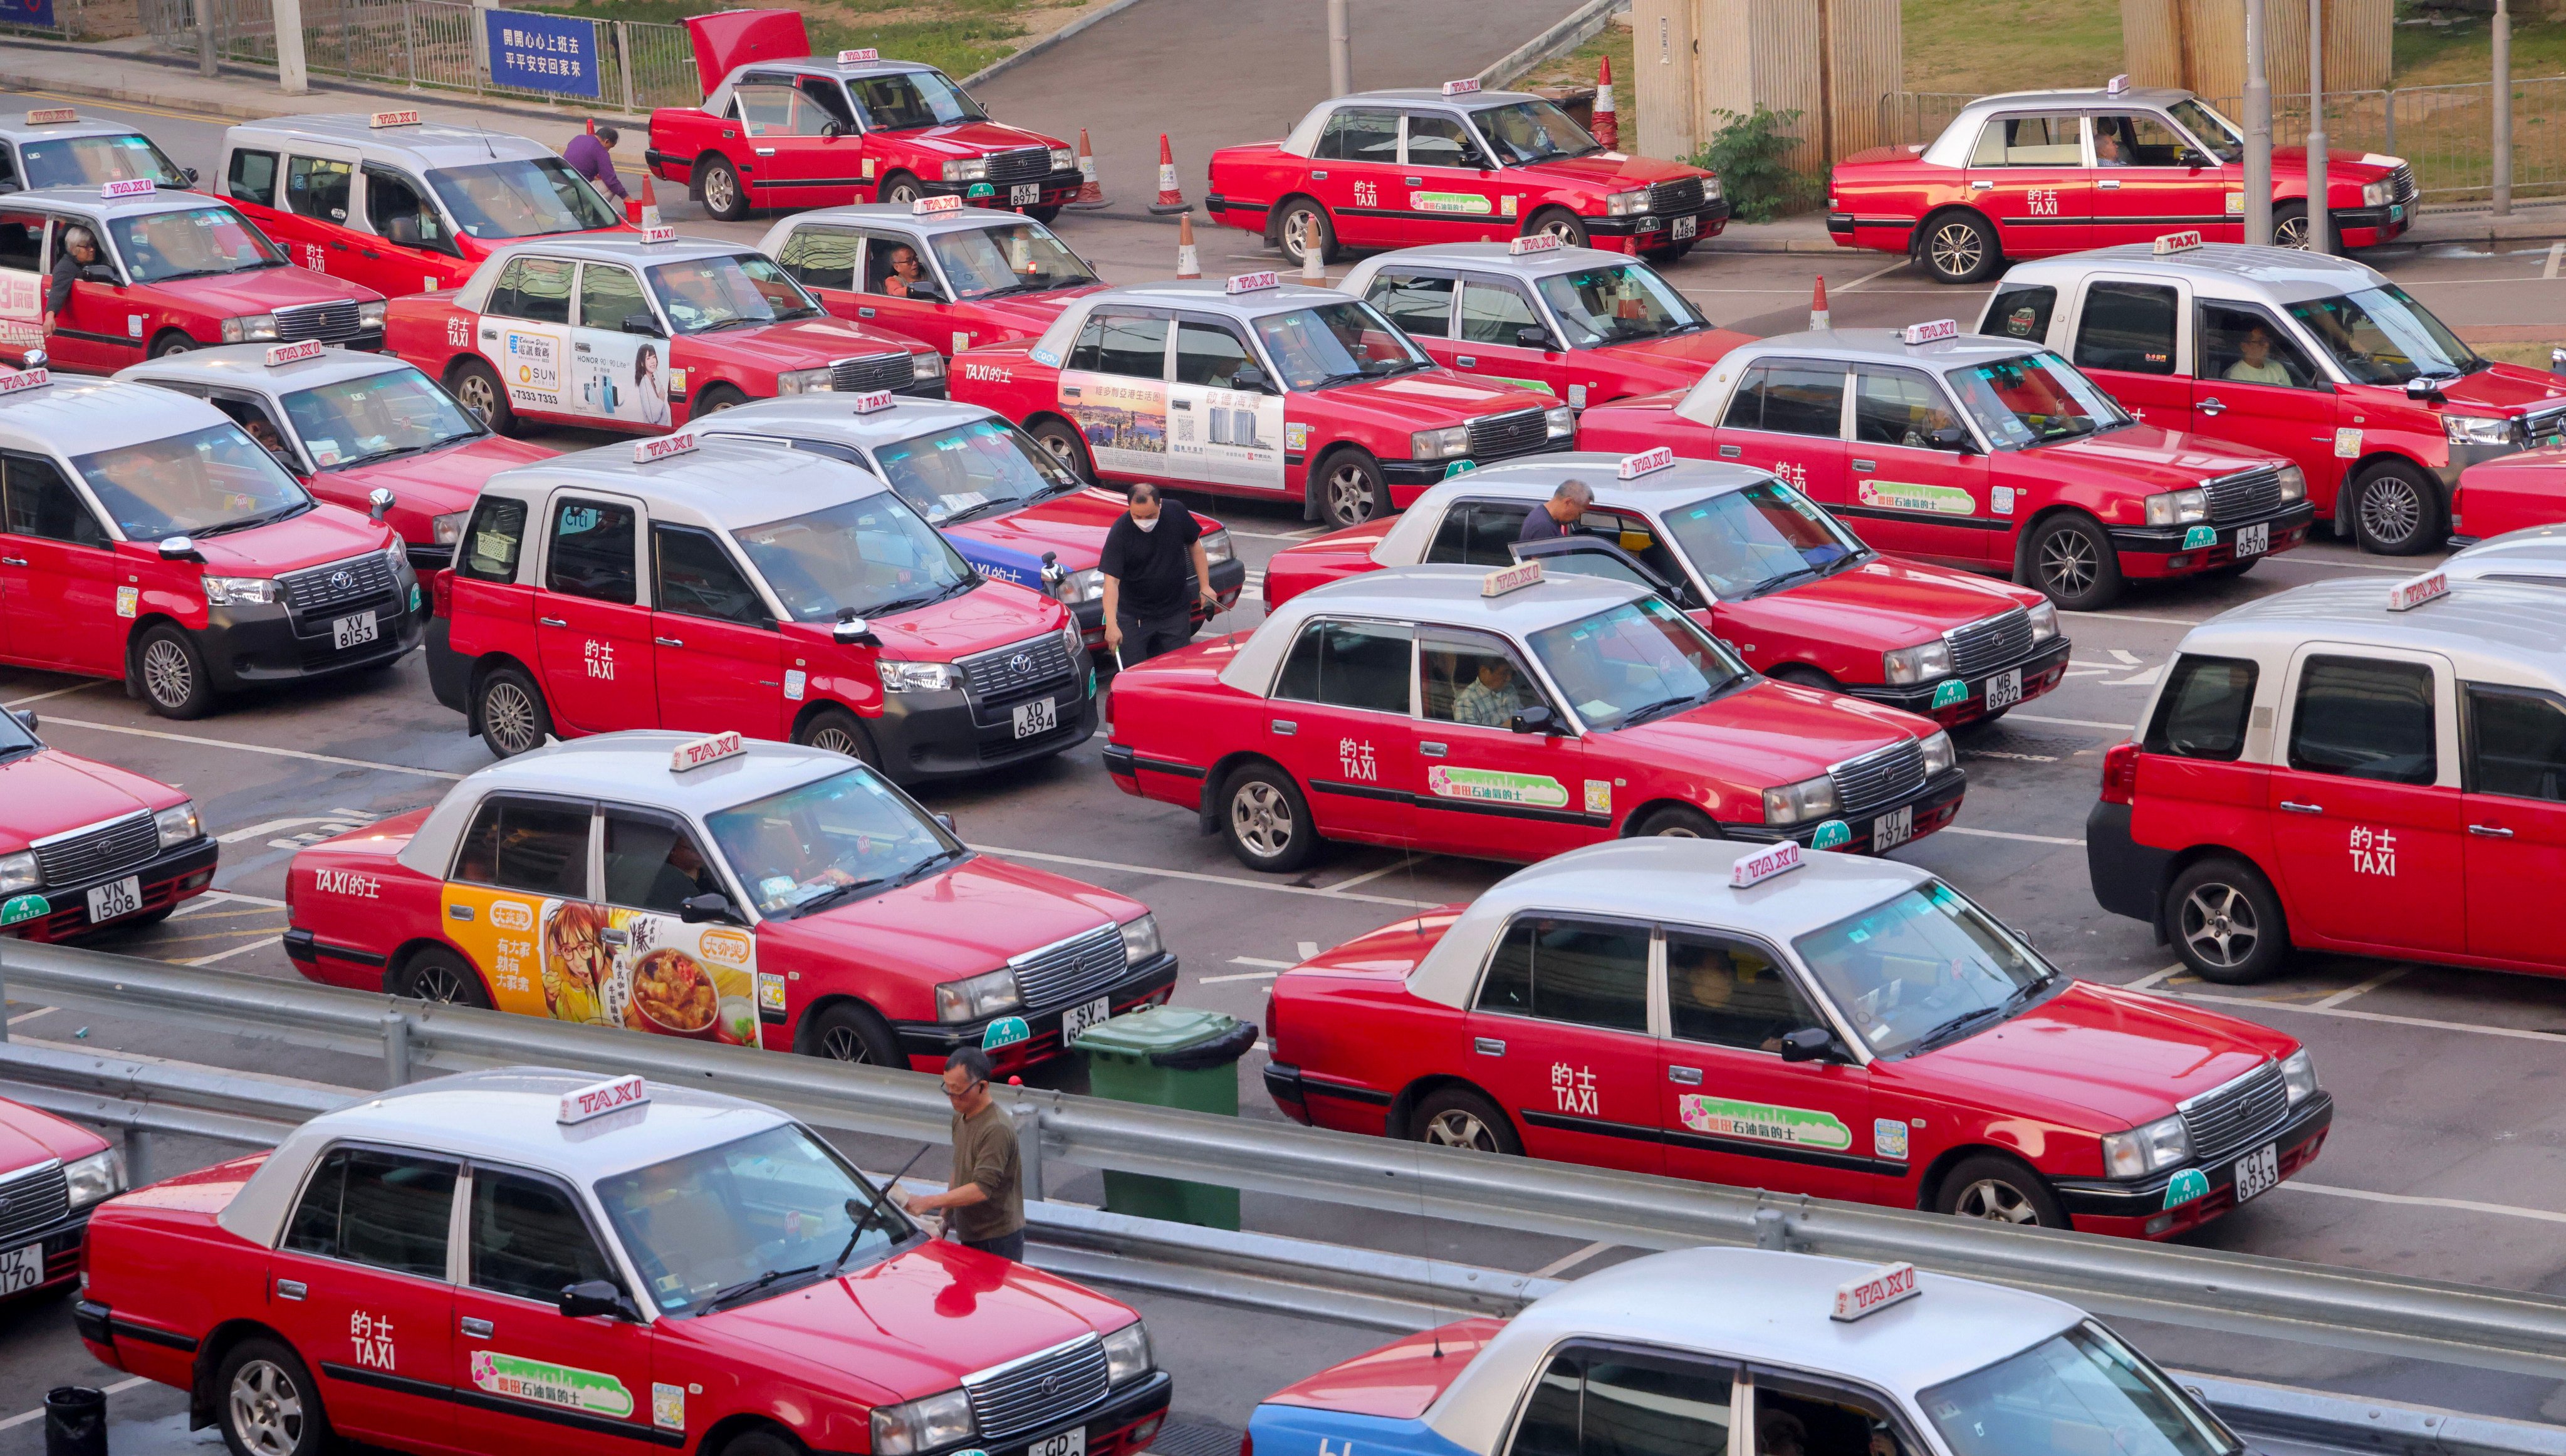 Hong Kong taxi drivers have long complained about their business being taken by Uber. Photo: May Tse